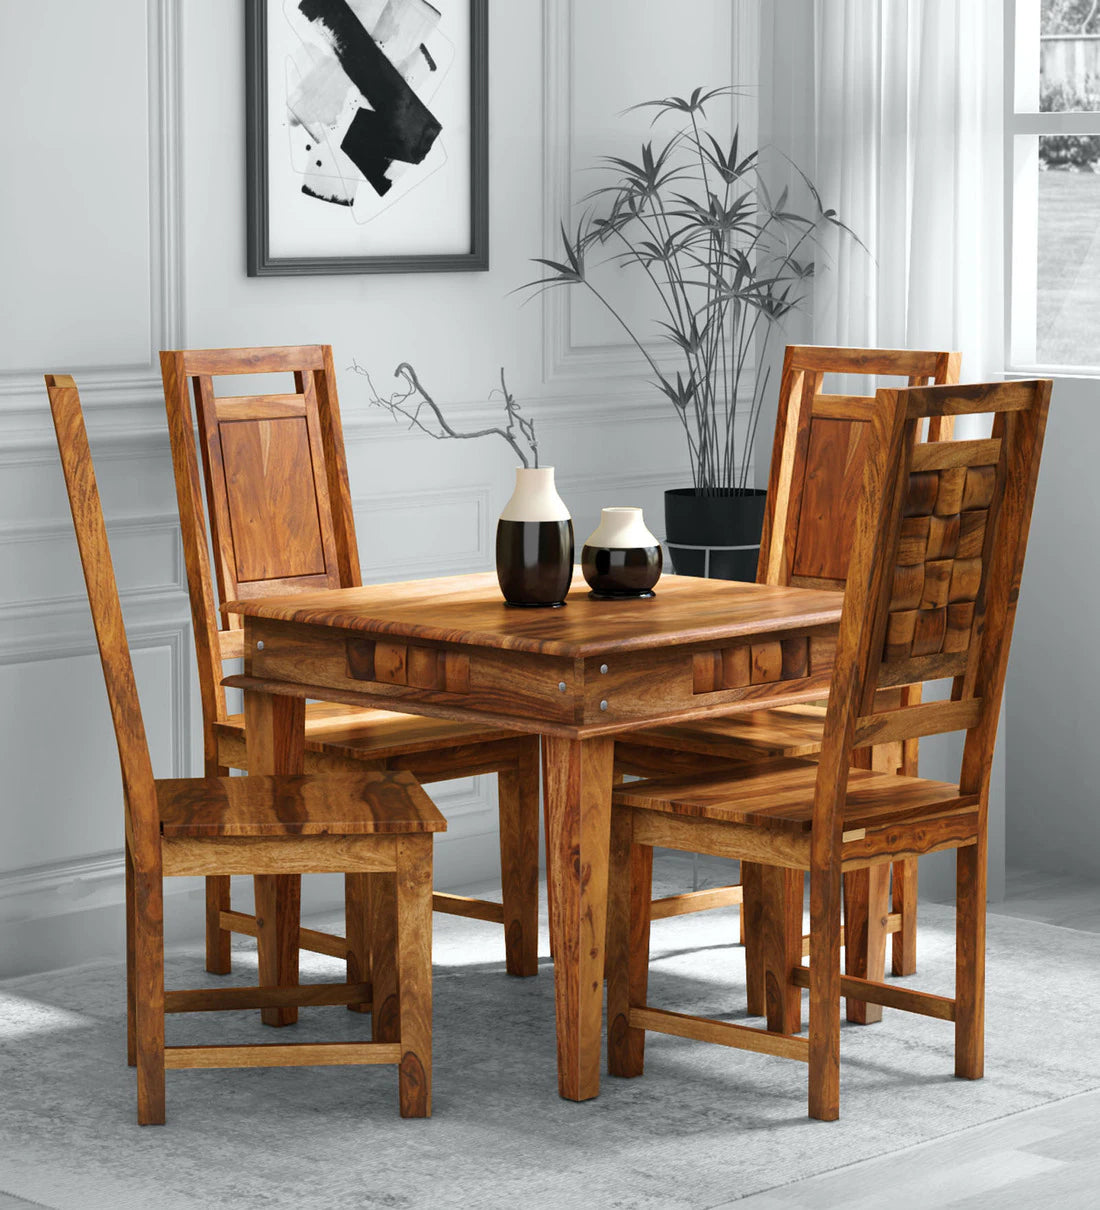 Niware Solid Wood 4 Seater Dining Table Set for Home - Rajwada Furnish